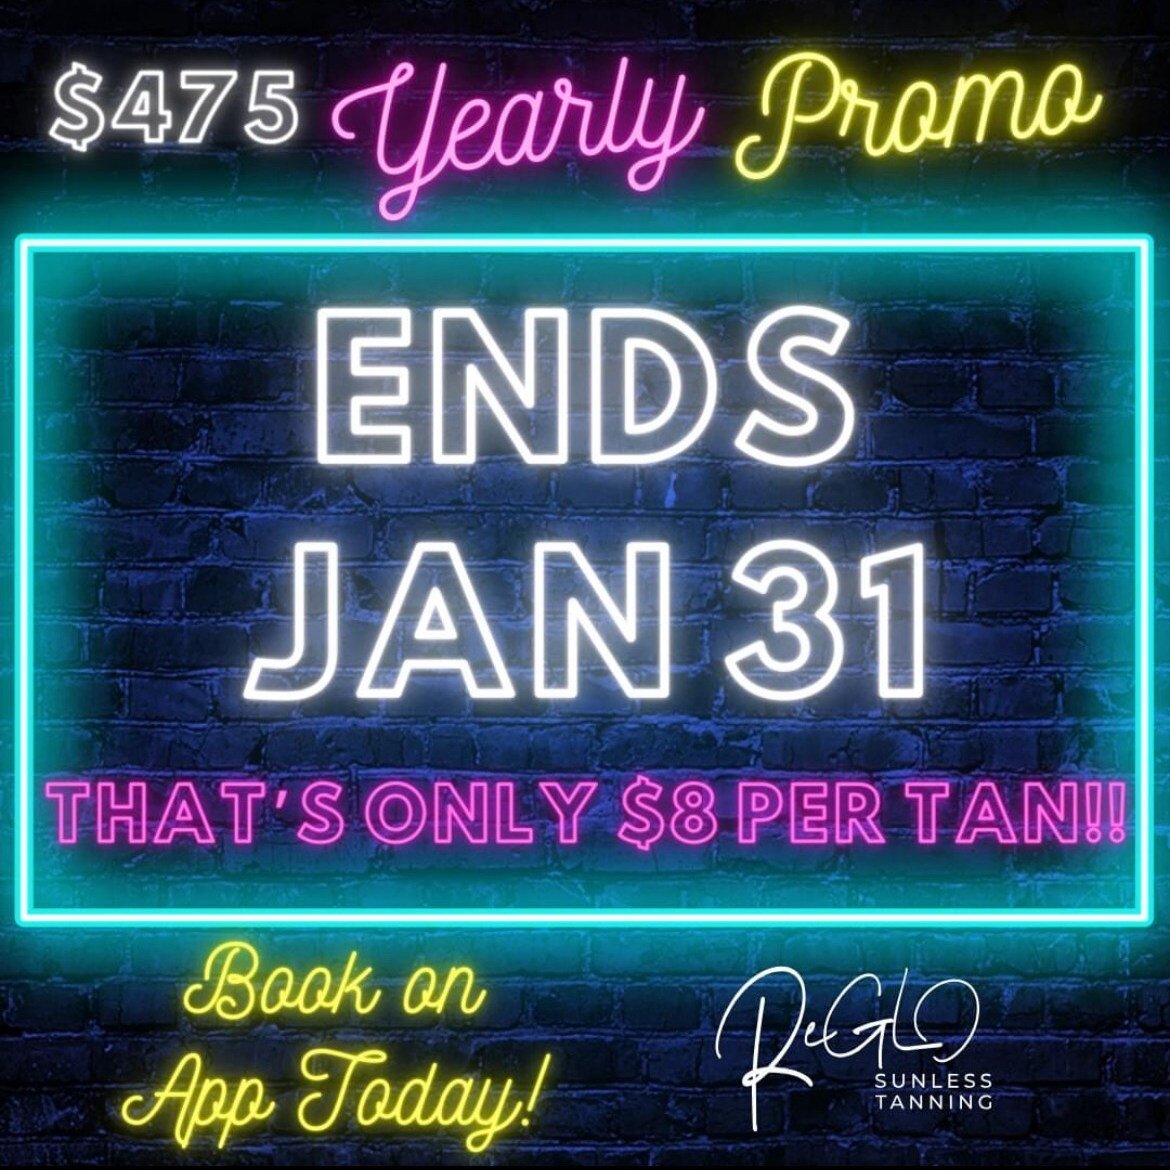 ReGLO Yearly Promo Ends TODAY!!

Hurry and snag this deal before the price changes. 

Your skin will thank you and your confidence will shine! 

#reglo #sunnlesstanning #restorewellness #panora #iowa #panoraiowa #lakepanorama